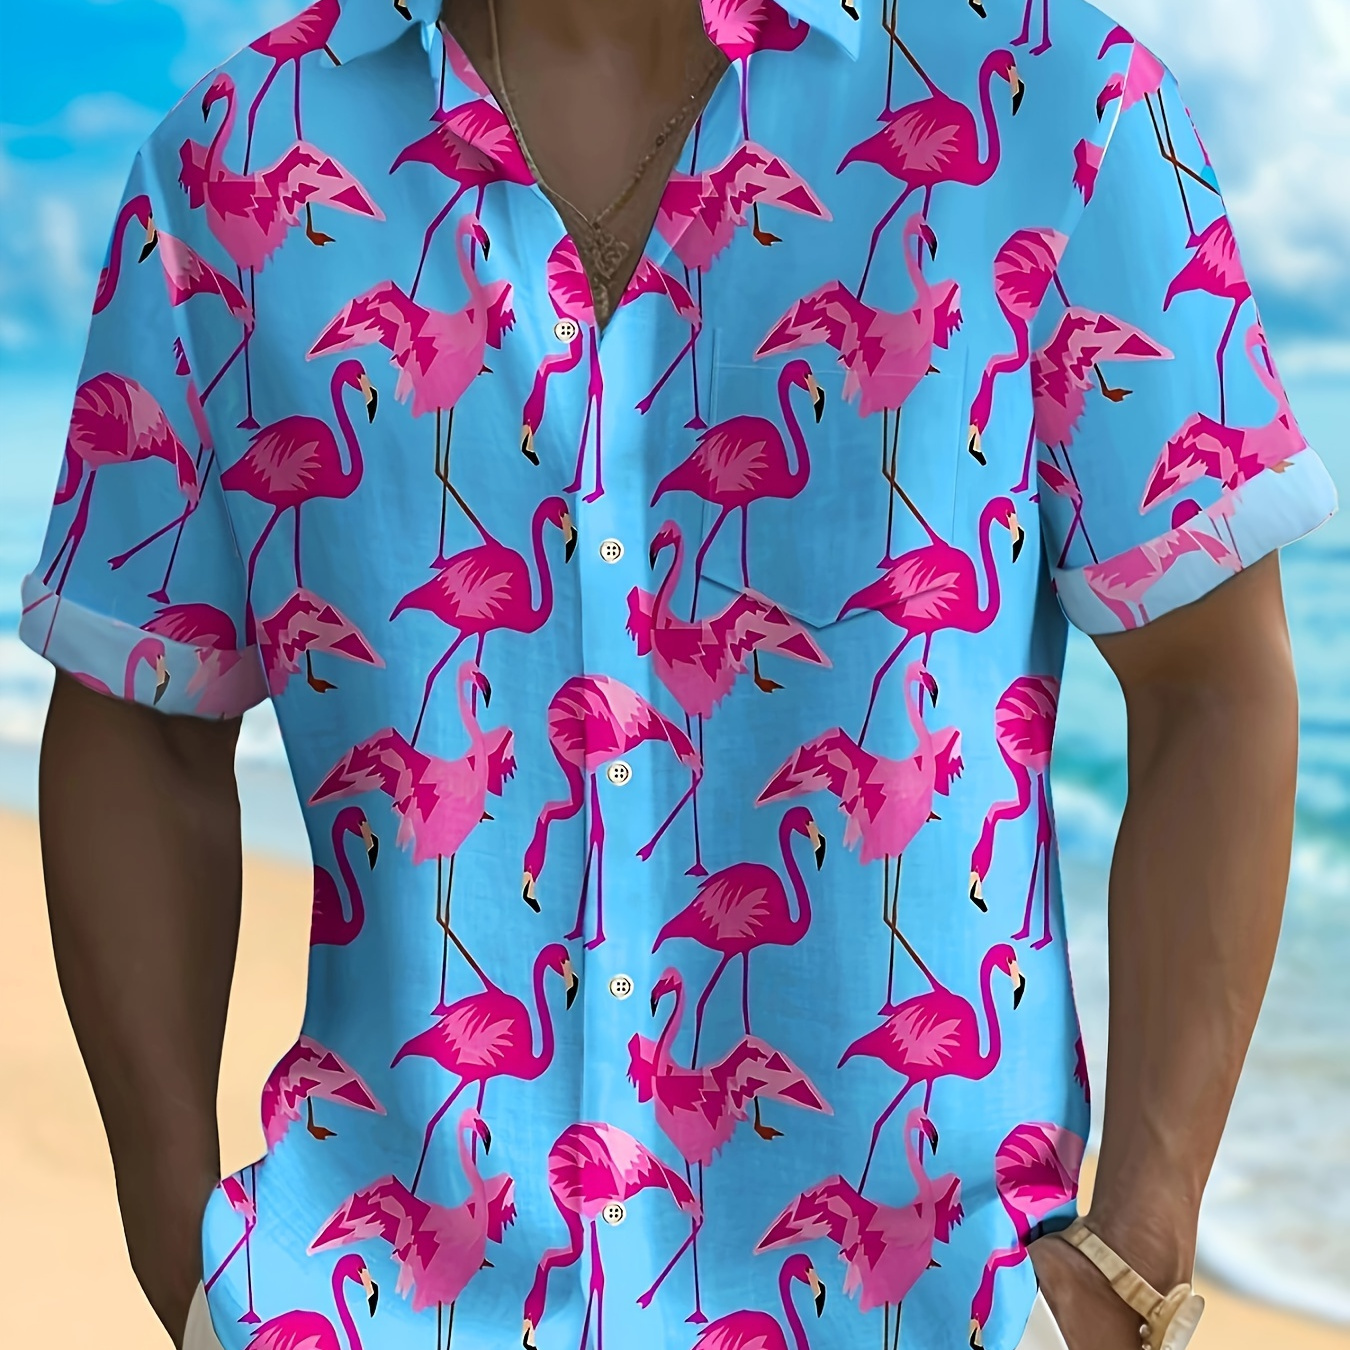 

Men's Trendy Hawaiian Graphic Shirt With Stylish Flamingo Print For Summer Vacation And Casual Wear